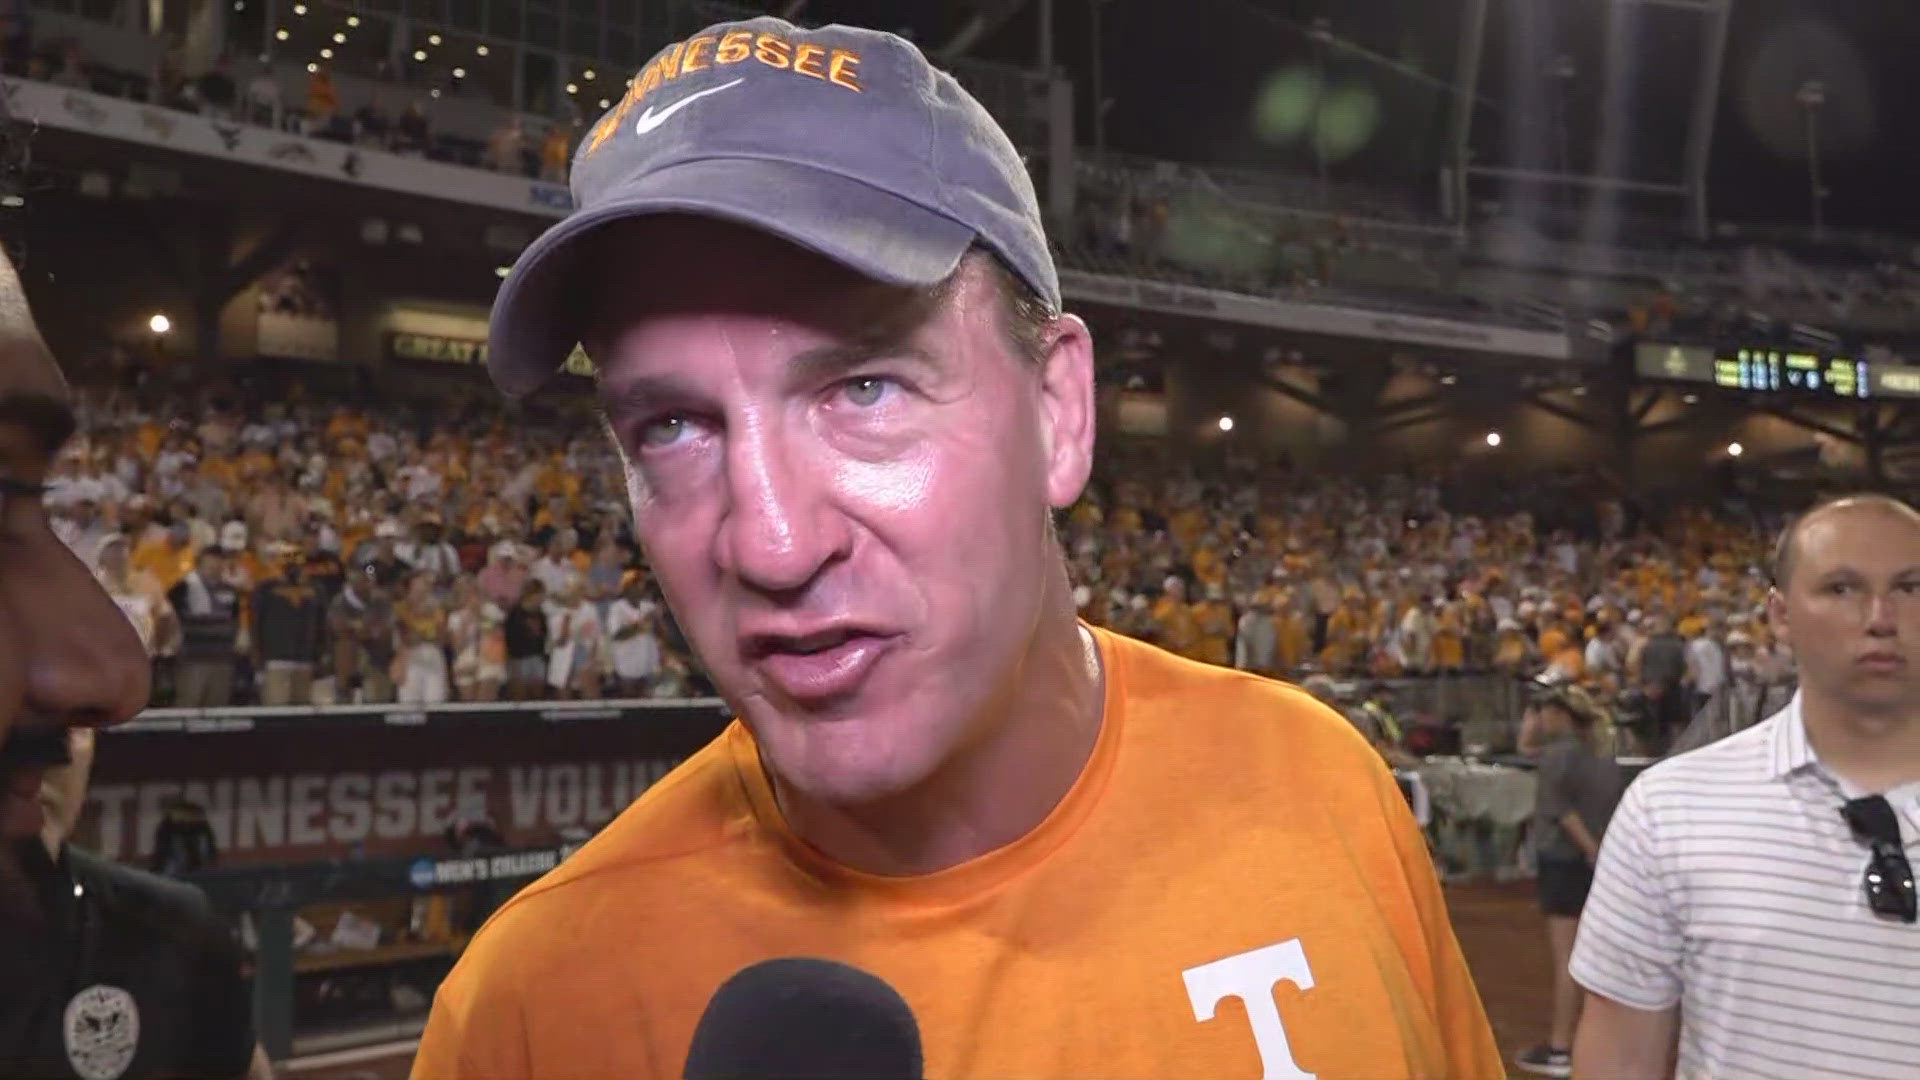 Tennessee wins National Championship, topples Texas A&M in Game 3 of College World Series Finals, 6-5.